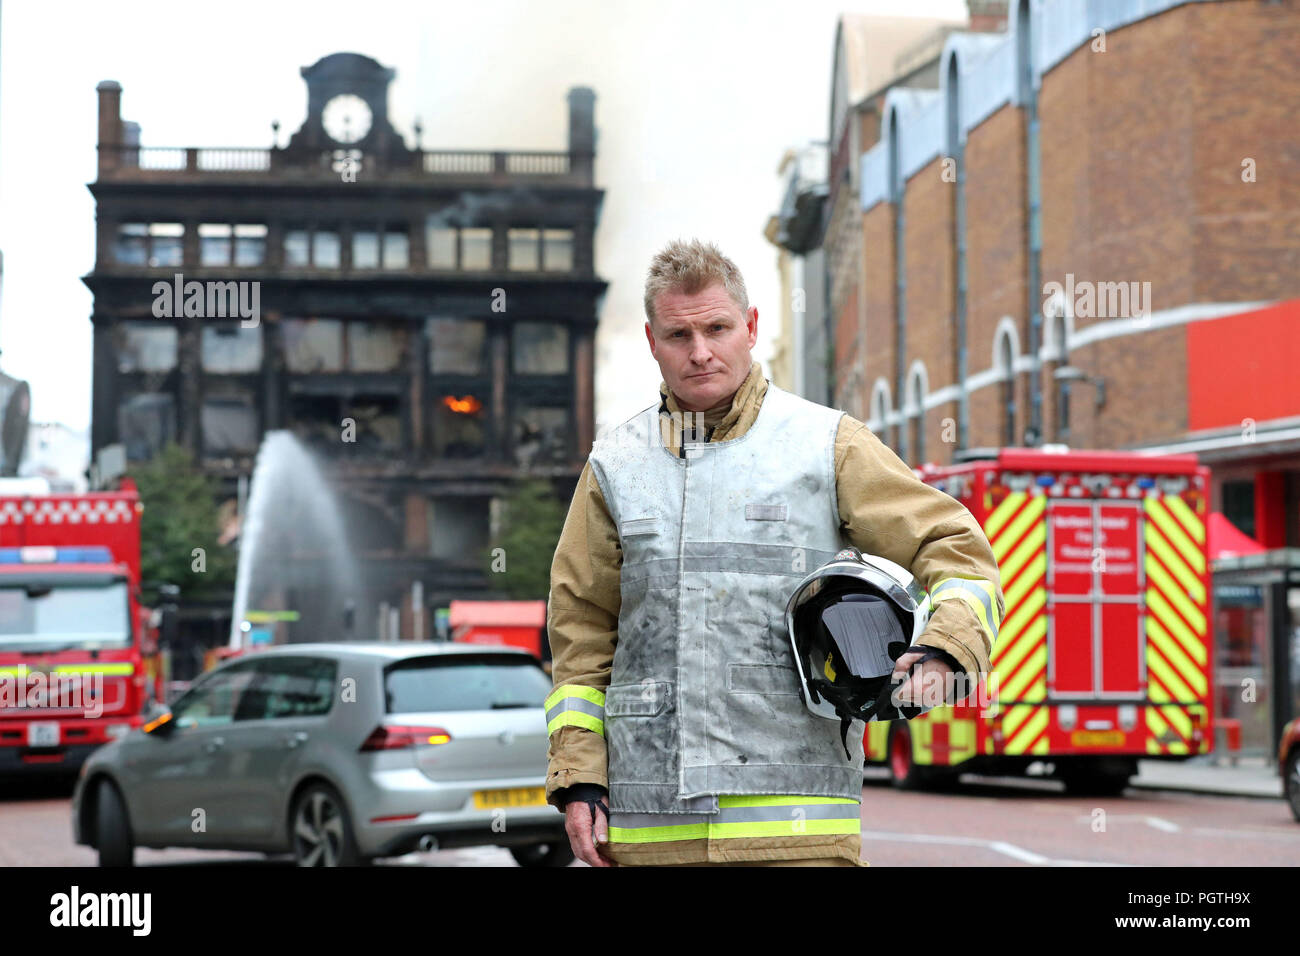 Assistant Chief Fire and Rescue Officer from Northern Ireland Fire & Rescue Service, Michael Graham, outside the Primark store in Belfast city centre where a major blaze broke out on Tuesday, following a press conference. Stock Photo